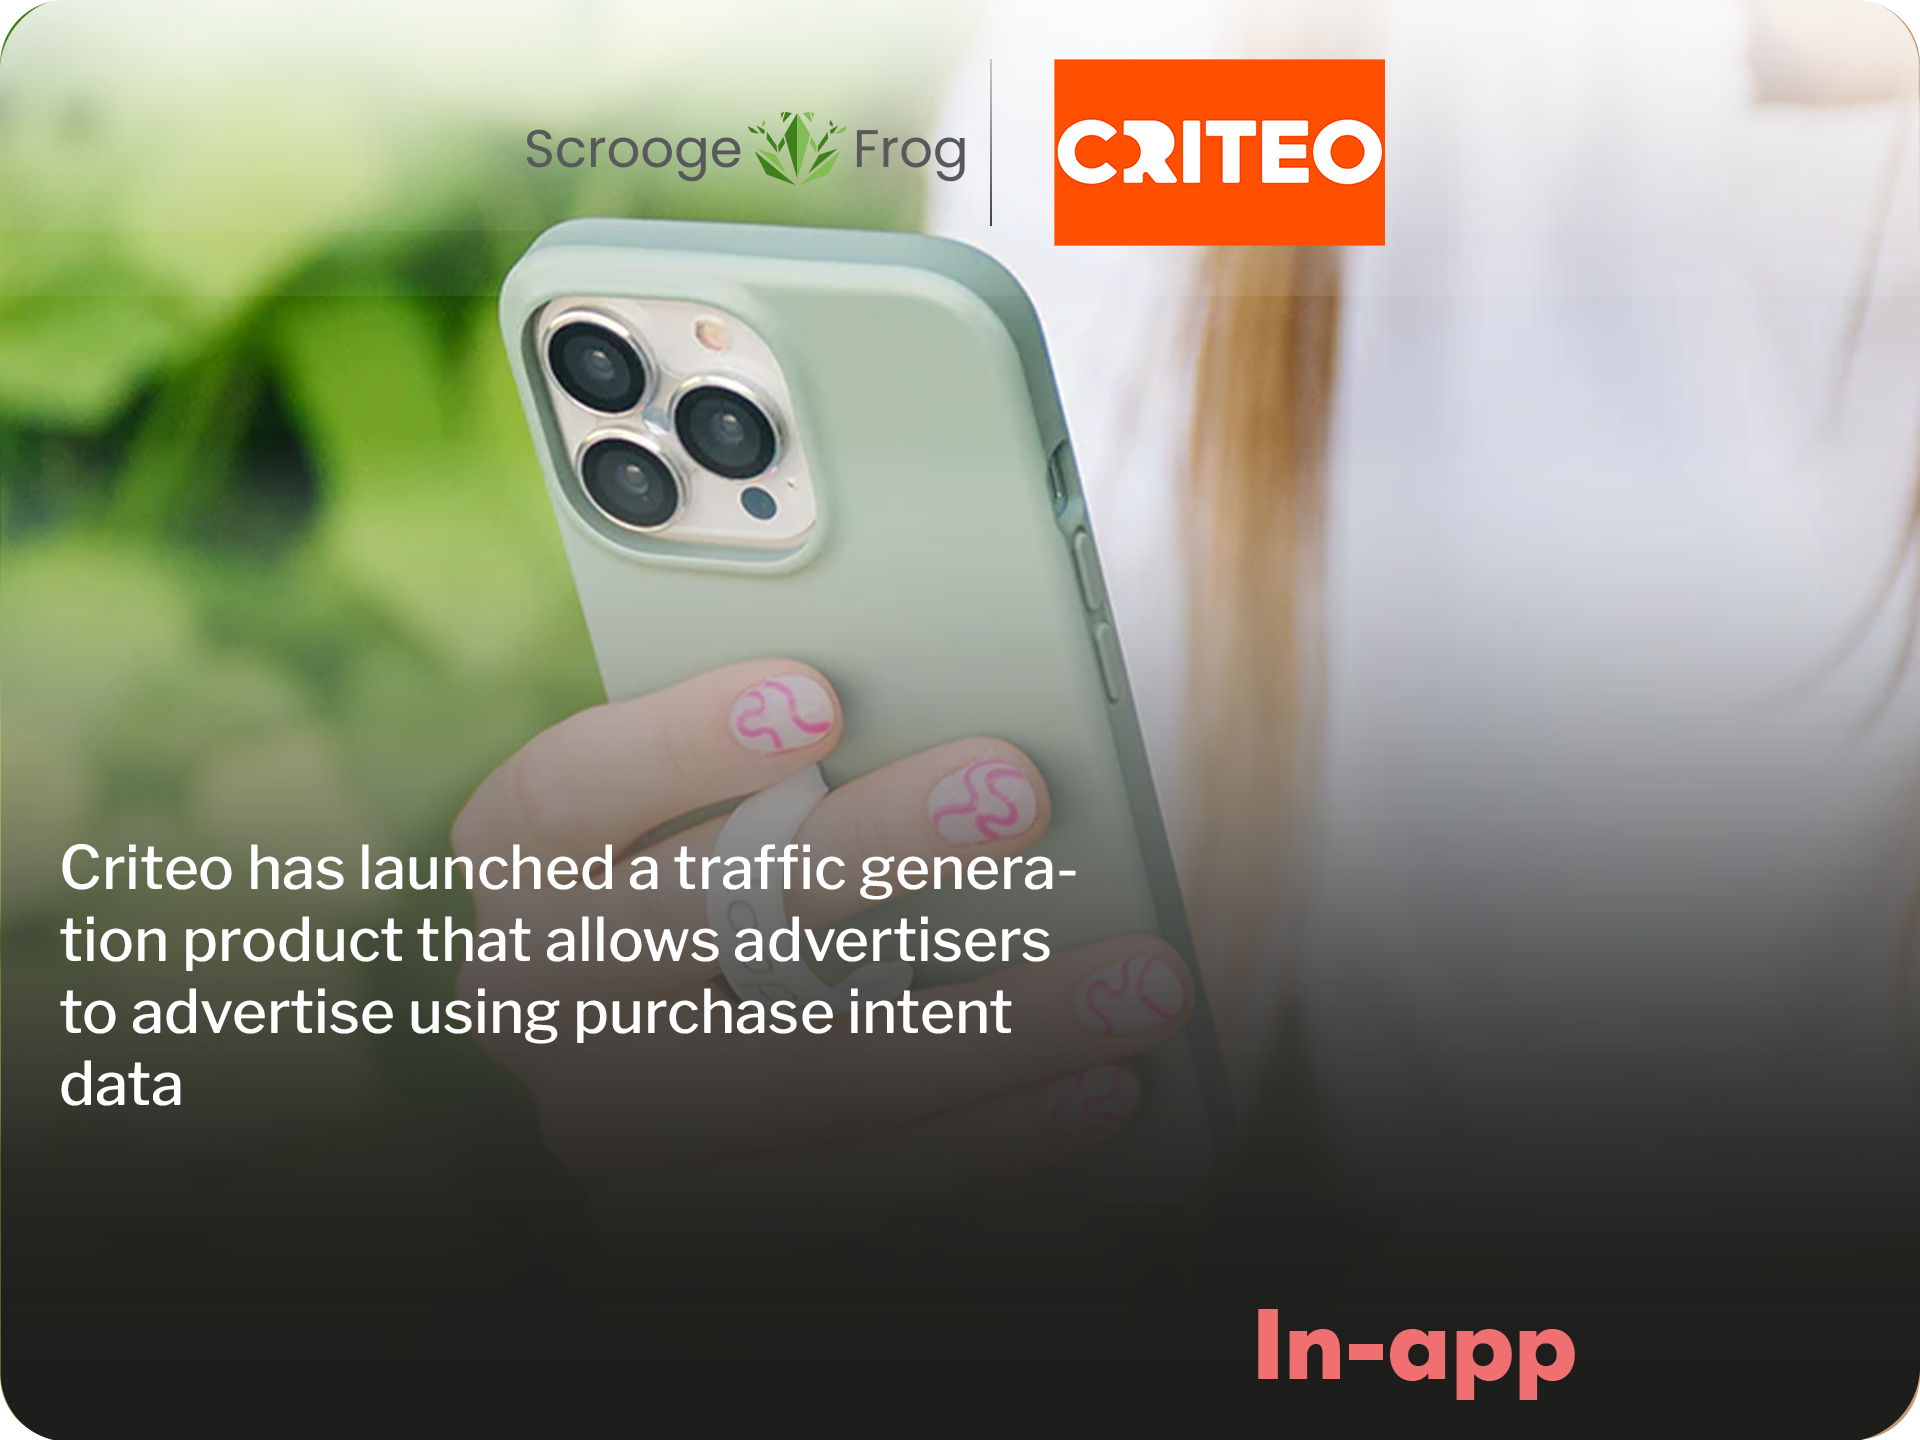 Criteo has launched a traffic generation product that allows advertisers to advertise using purchase intent data